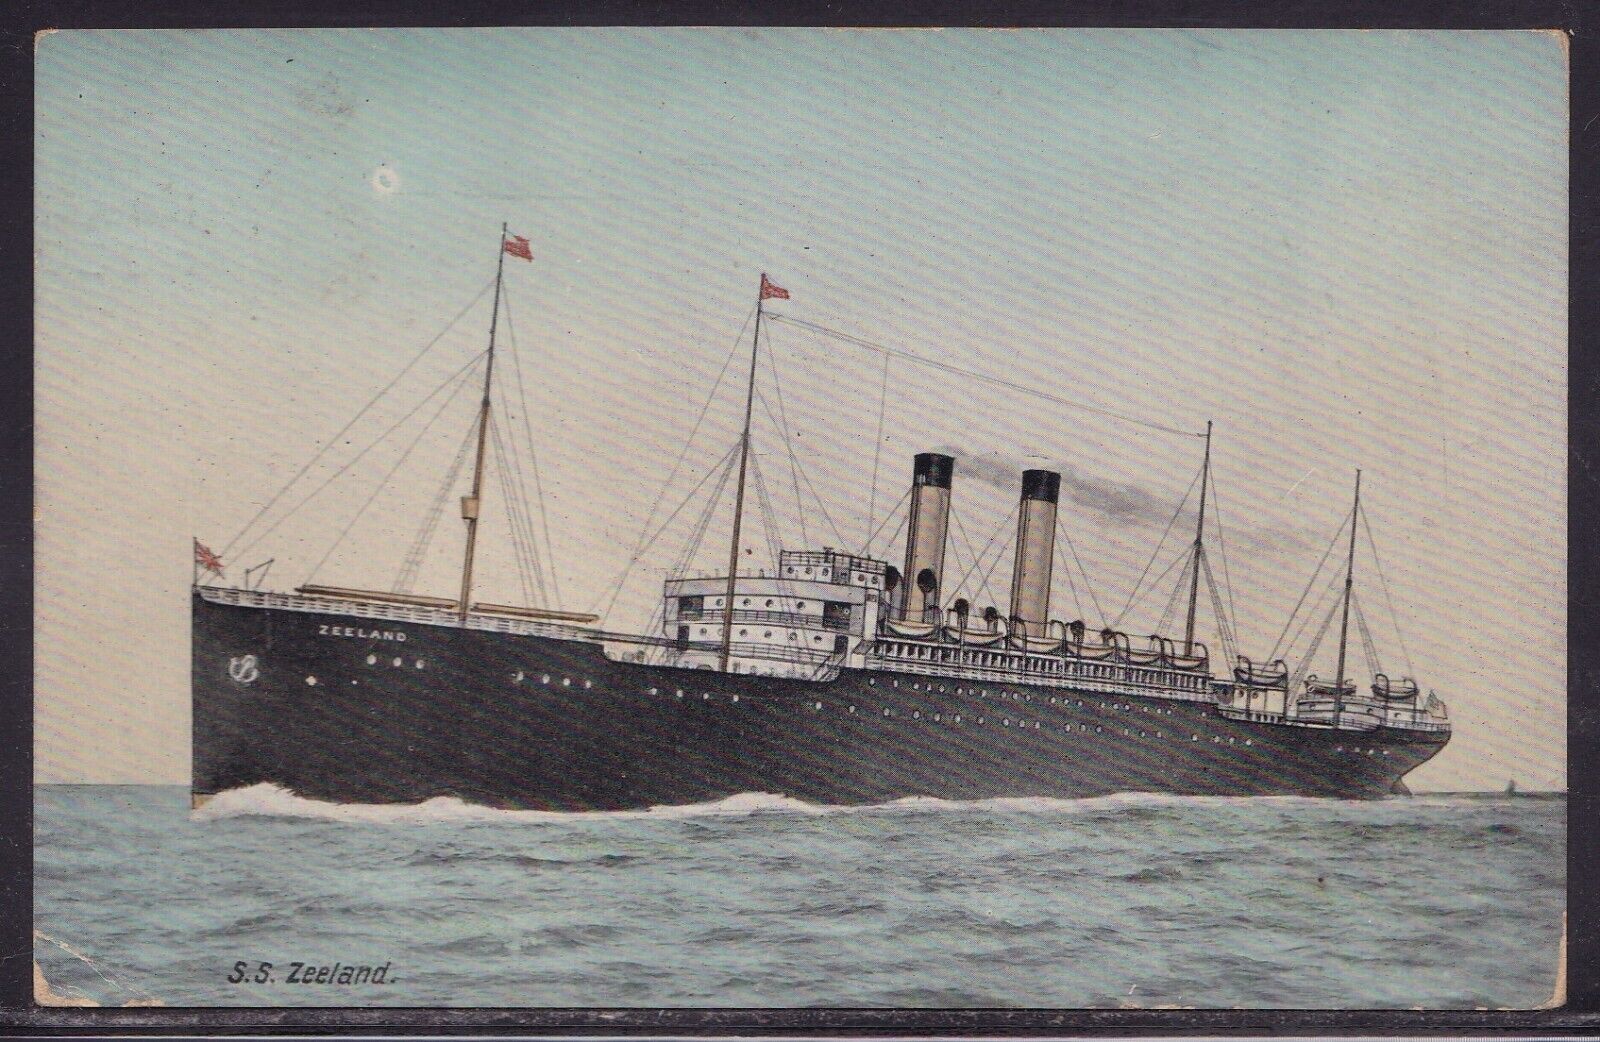 SS ZEELAND WHITE STAR LINE COLOR POSTCARD ** OFFERS ** POSTED 1910